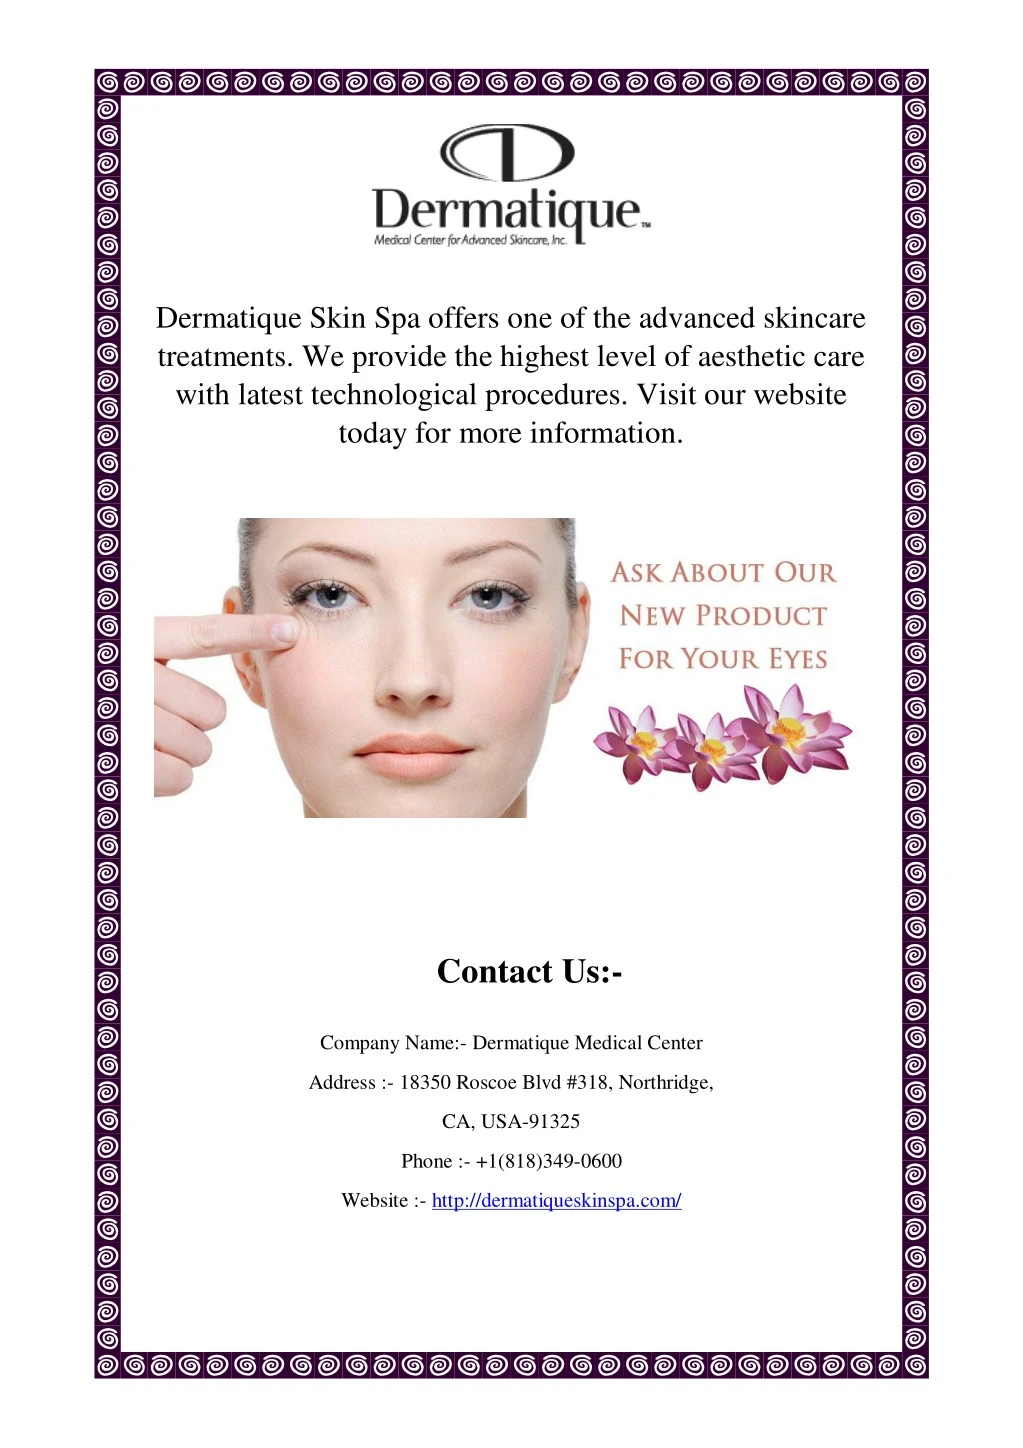 dermatique skin spa offers one of the advanced